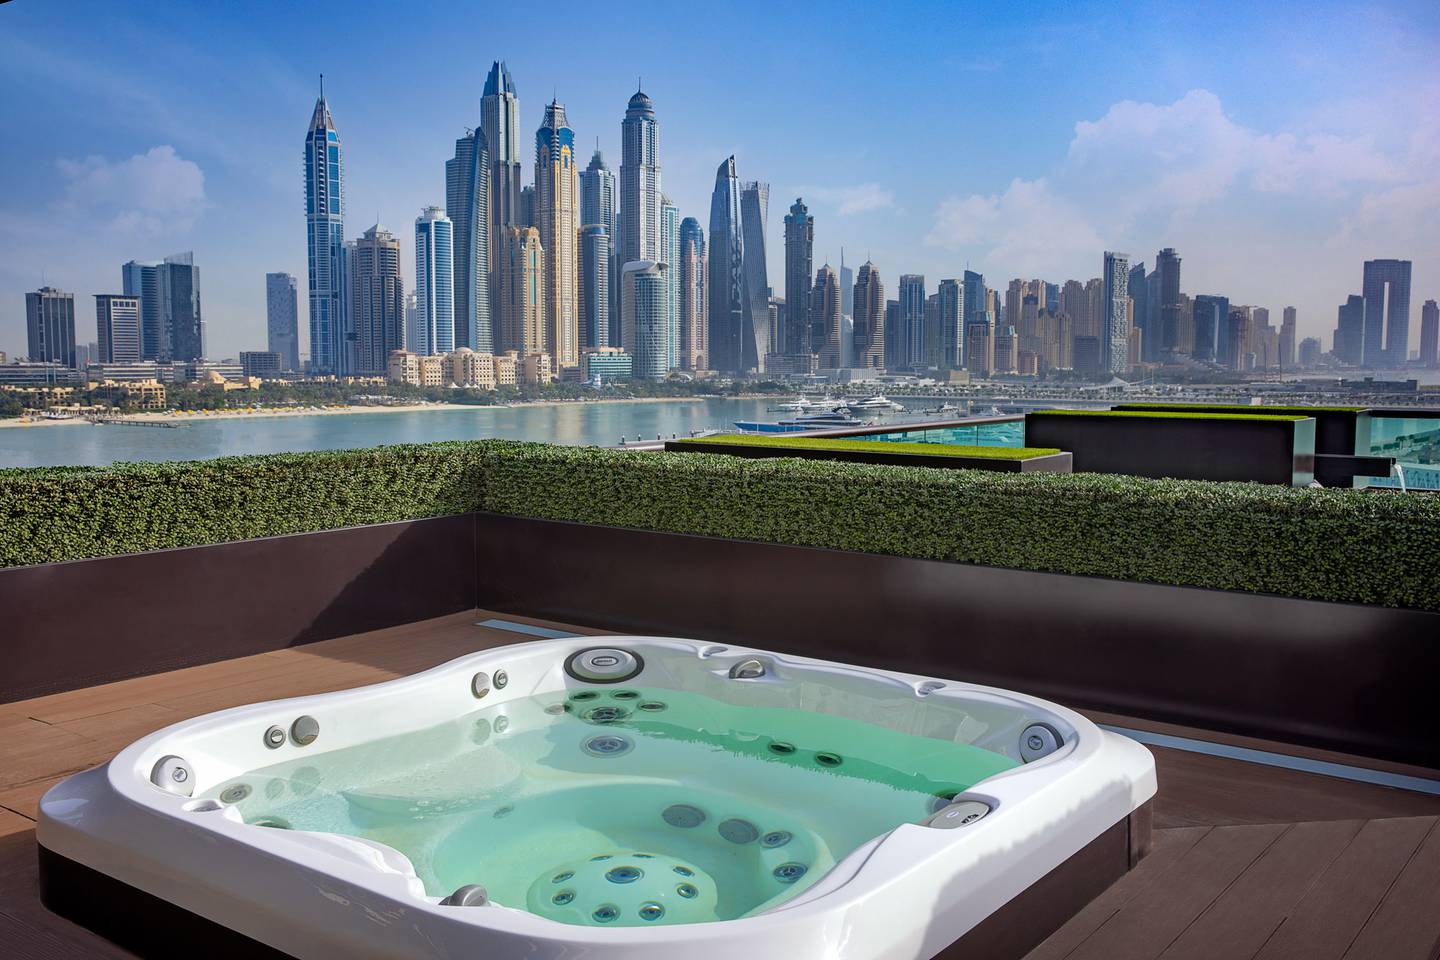 The Imperial Suite comes with skyline views and a balcony Jacuzzi. Photo: Hilton